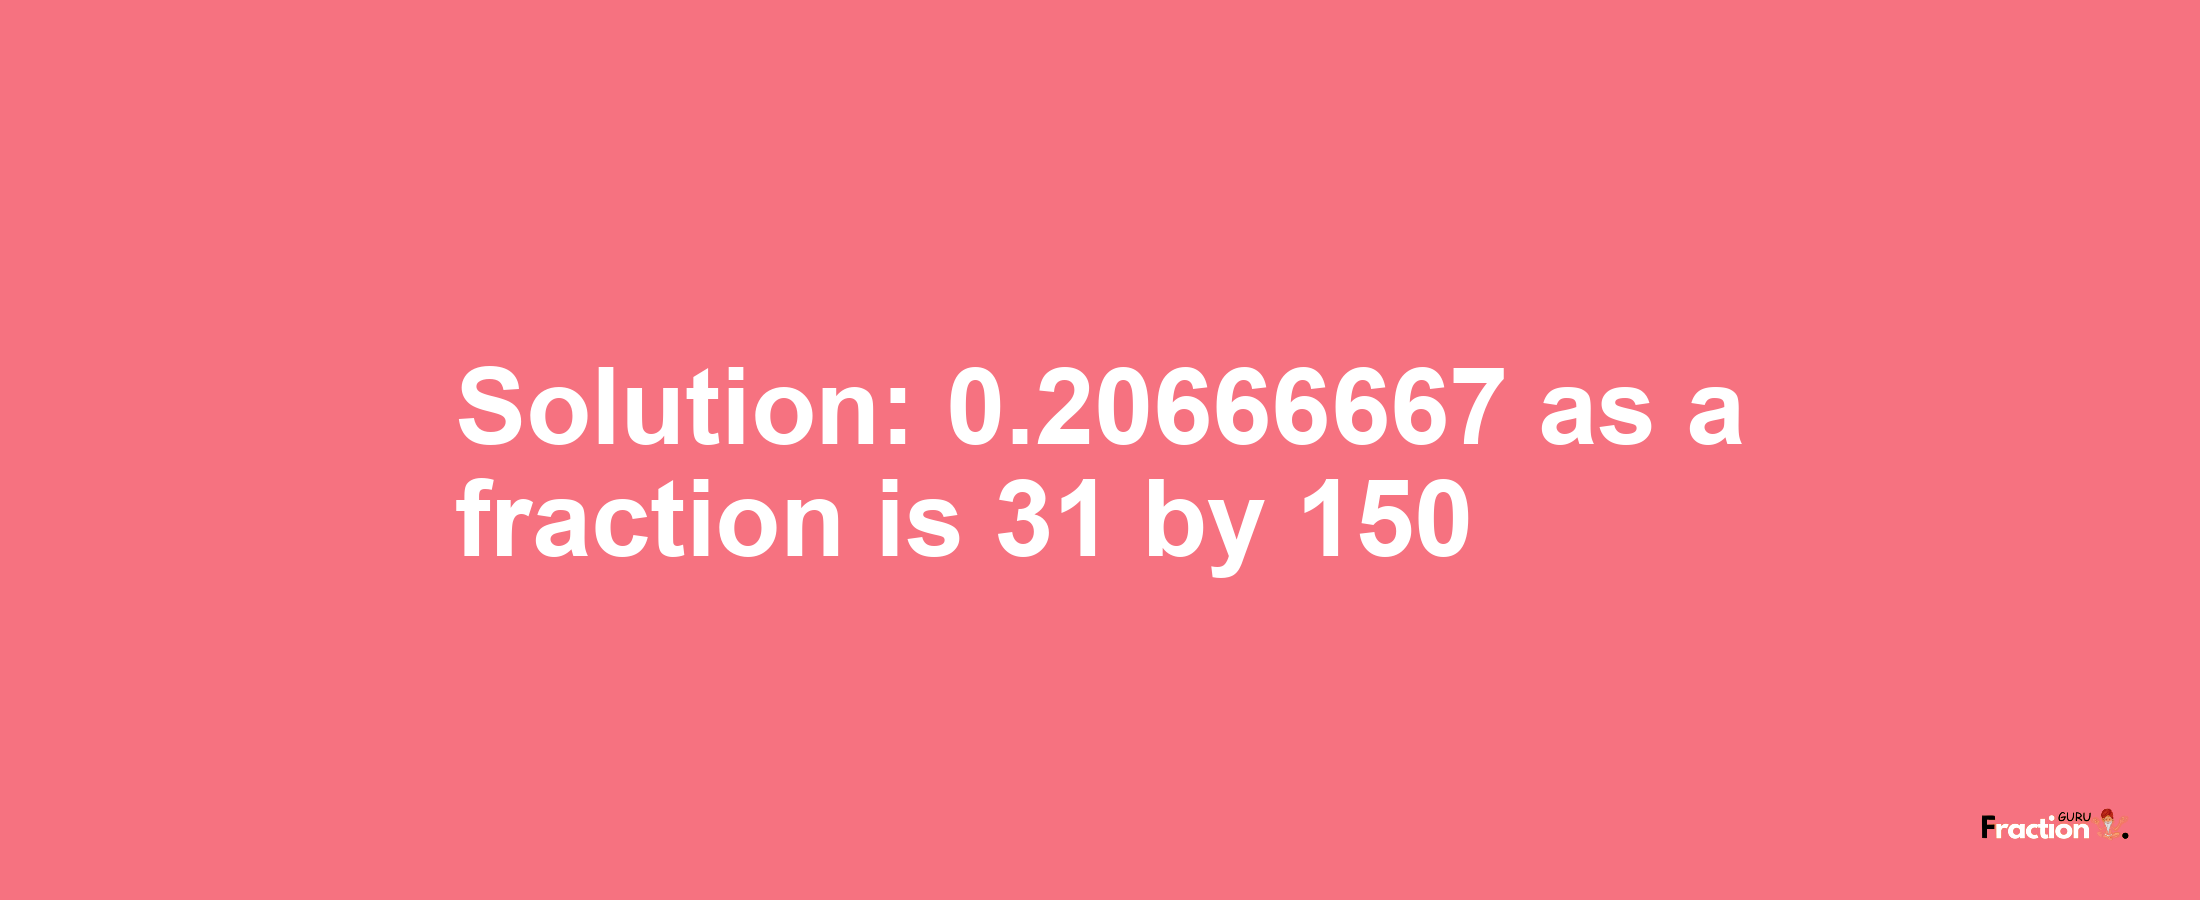 Solution:0.20666667 as a fraction is 31/150